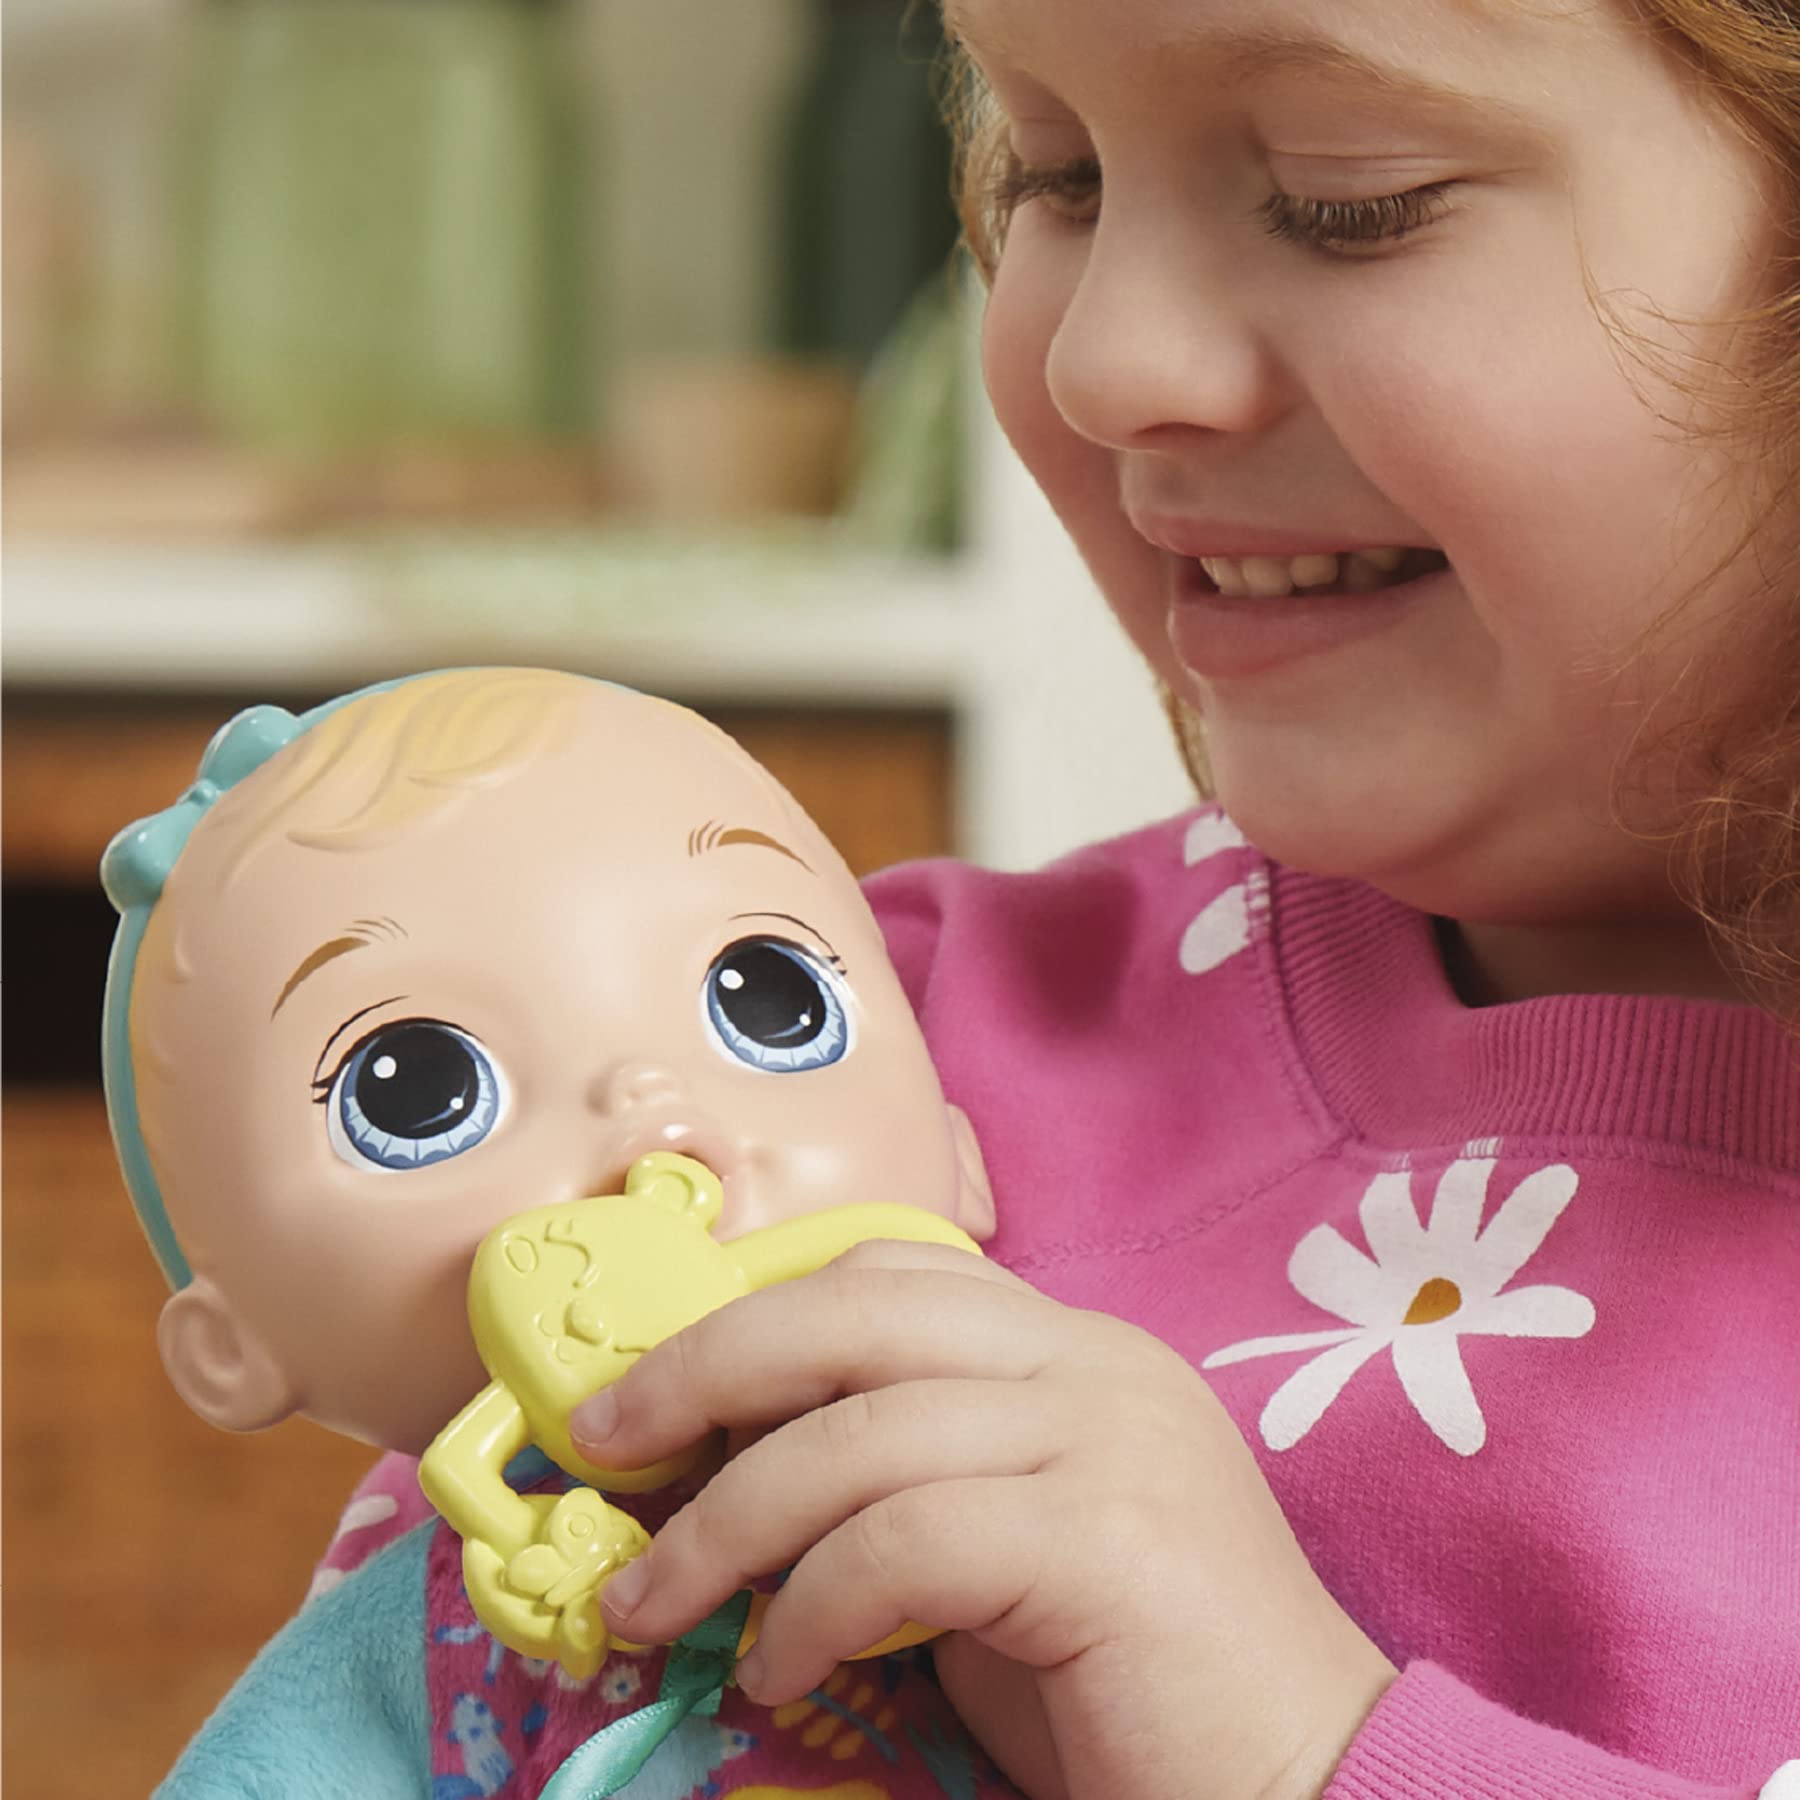 Baby Alive Soft ‘n Cute Doll, Blonde Hair, 11-Inch First Baby Doll Toy, Washable Soft Doll, Toddlers Kids 18 Months and Up, Teether Accessory